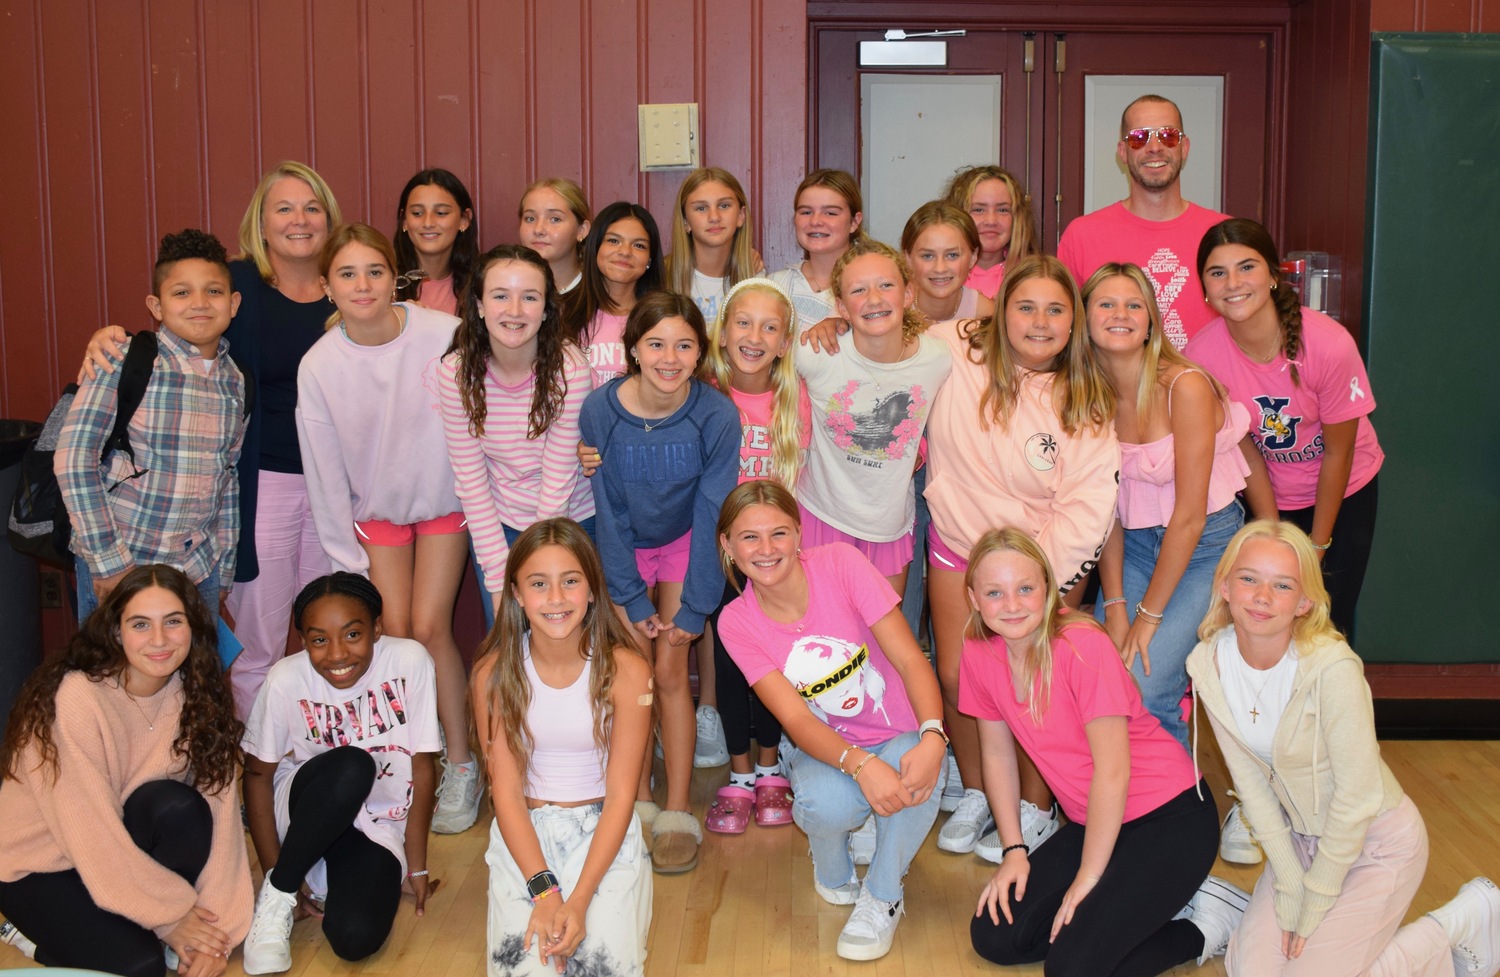 As part of Homecoming Spirit Week activities on Oct. 3, students across the Westhampton Beach School District, including at its middle school,  wore pink to school to raise breast cancer awareness. COURTESY WESTHAMPTON BEACH SCHOOL DISTRICT